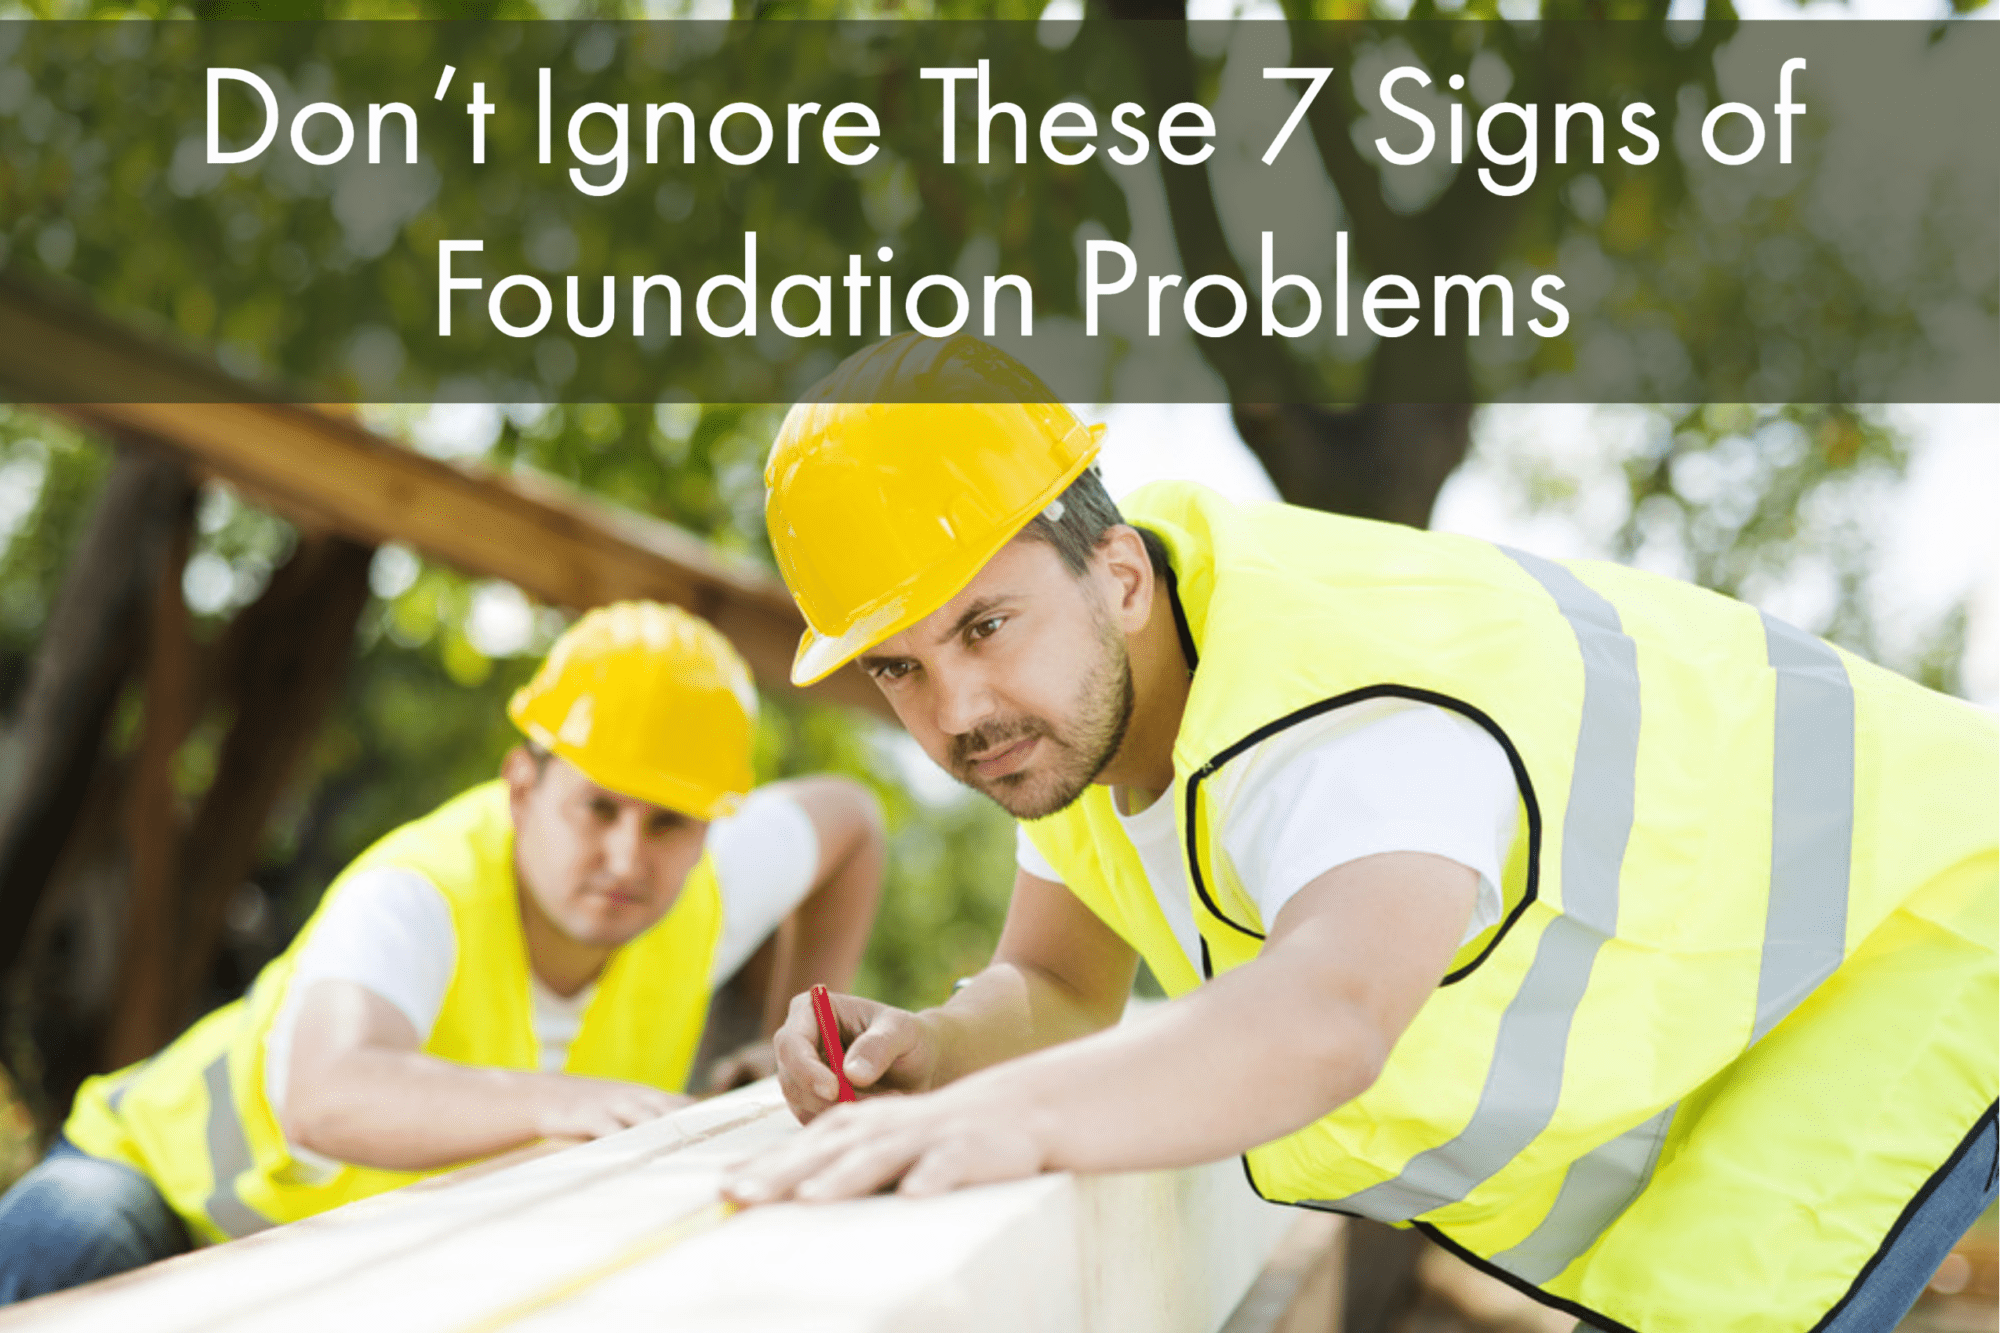 Don’t Ignore These 7 Signs of Foundation Problems